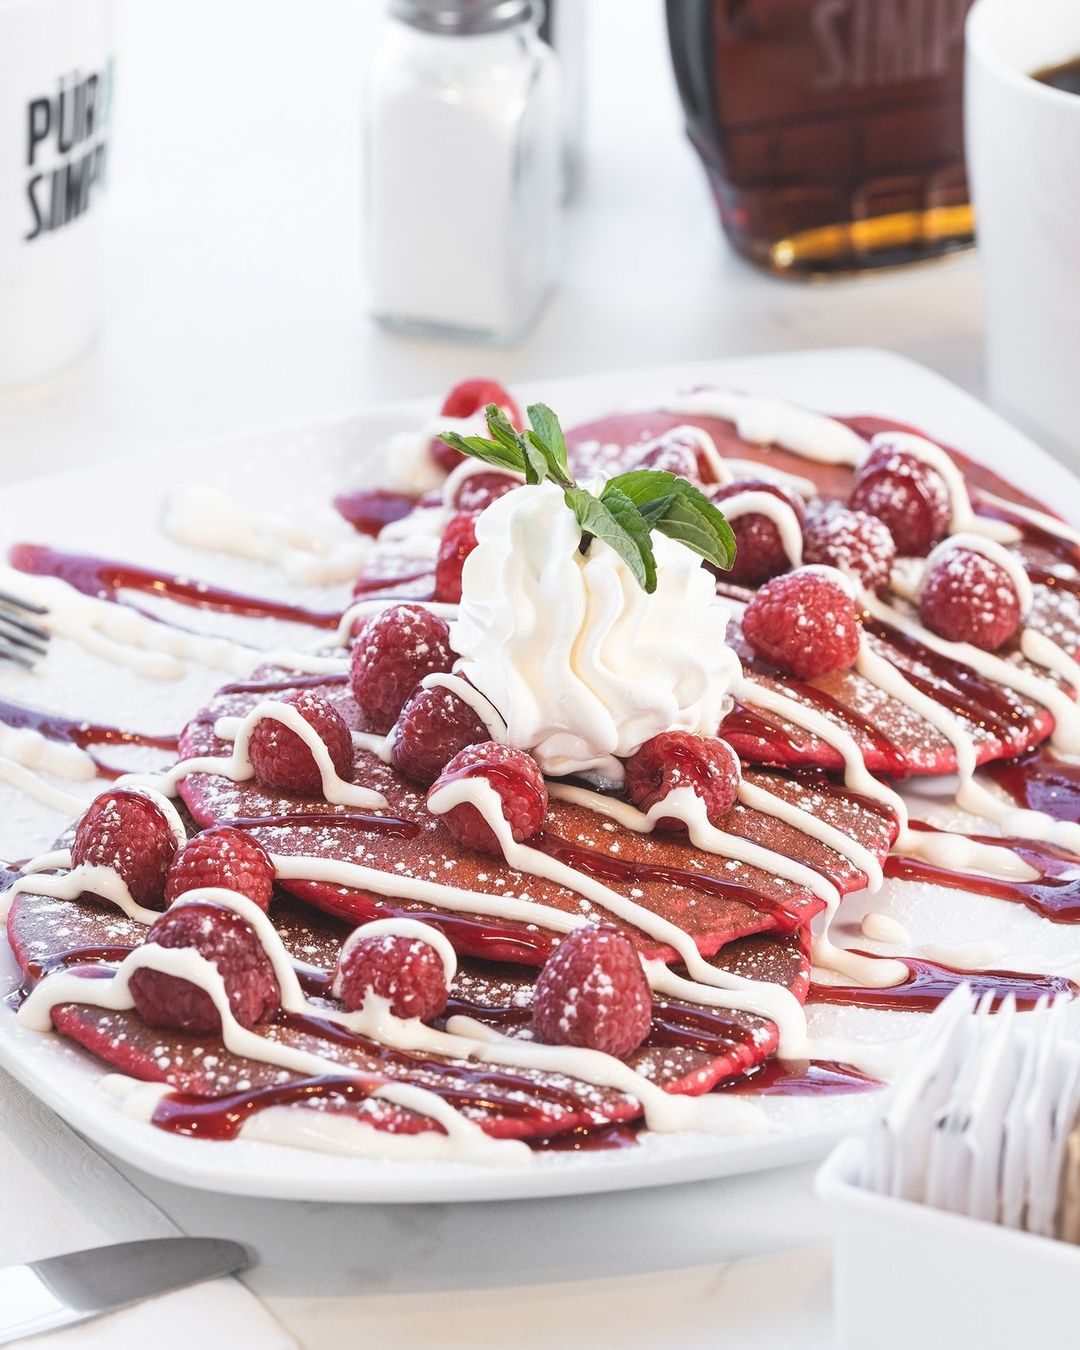 red velvet pancakes topped with raspberries, sauces and whipped cream